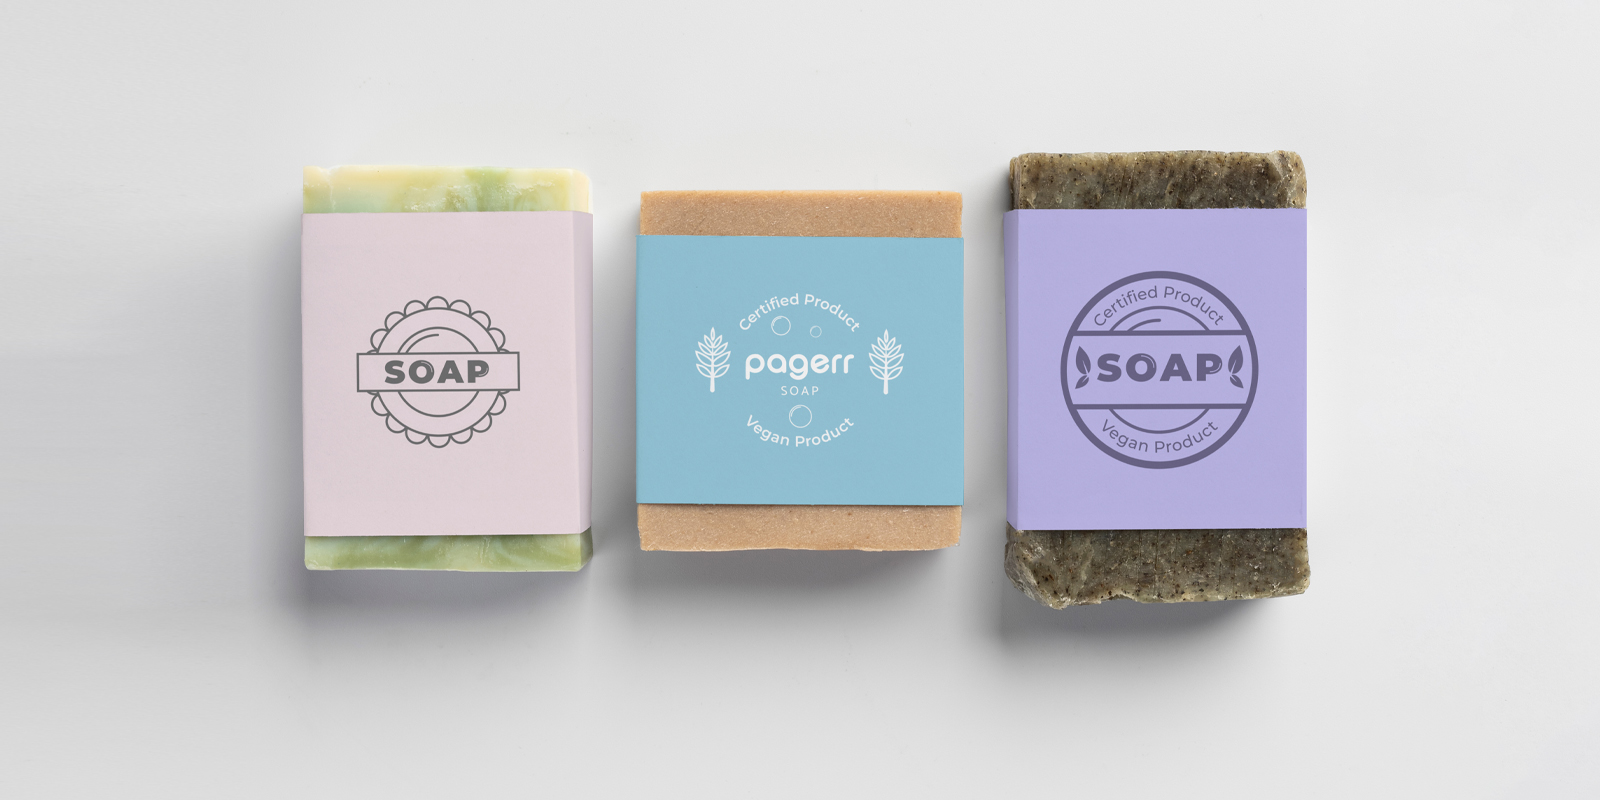 Soap labels in Toowoomba - Print with Pagerr